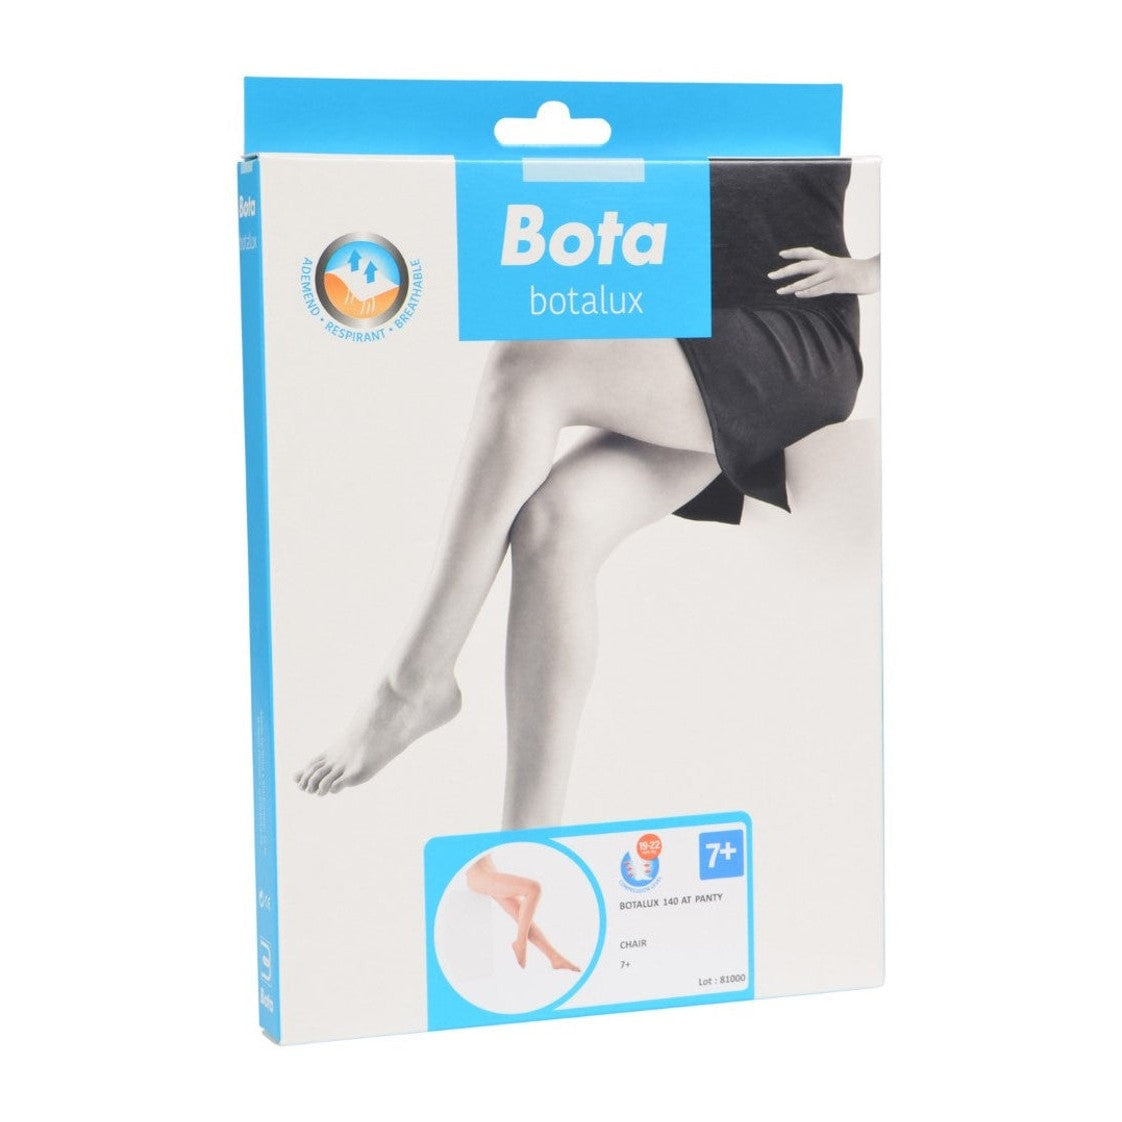 Botalux 140 support tights at ch skin color